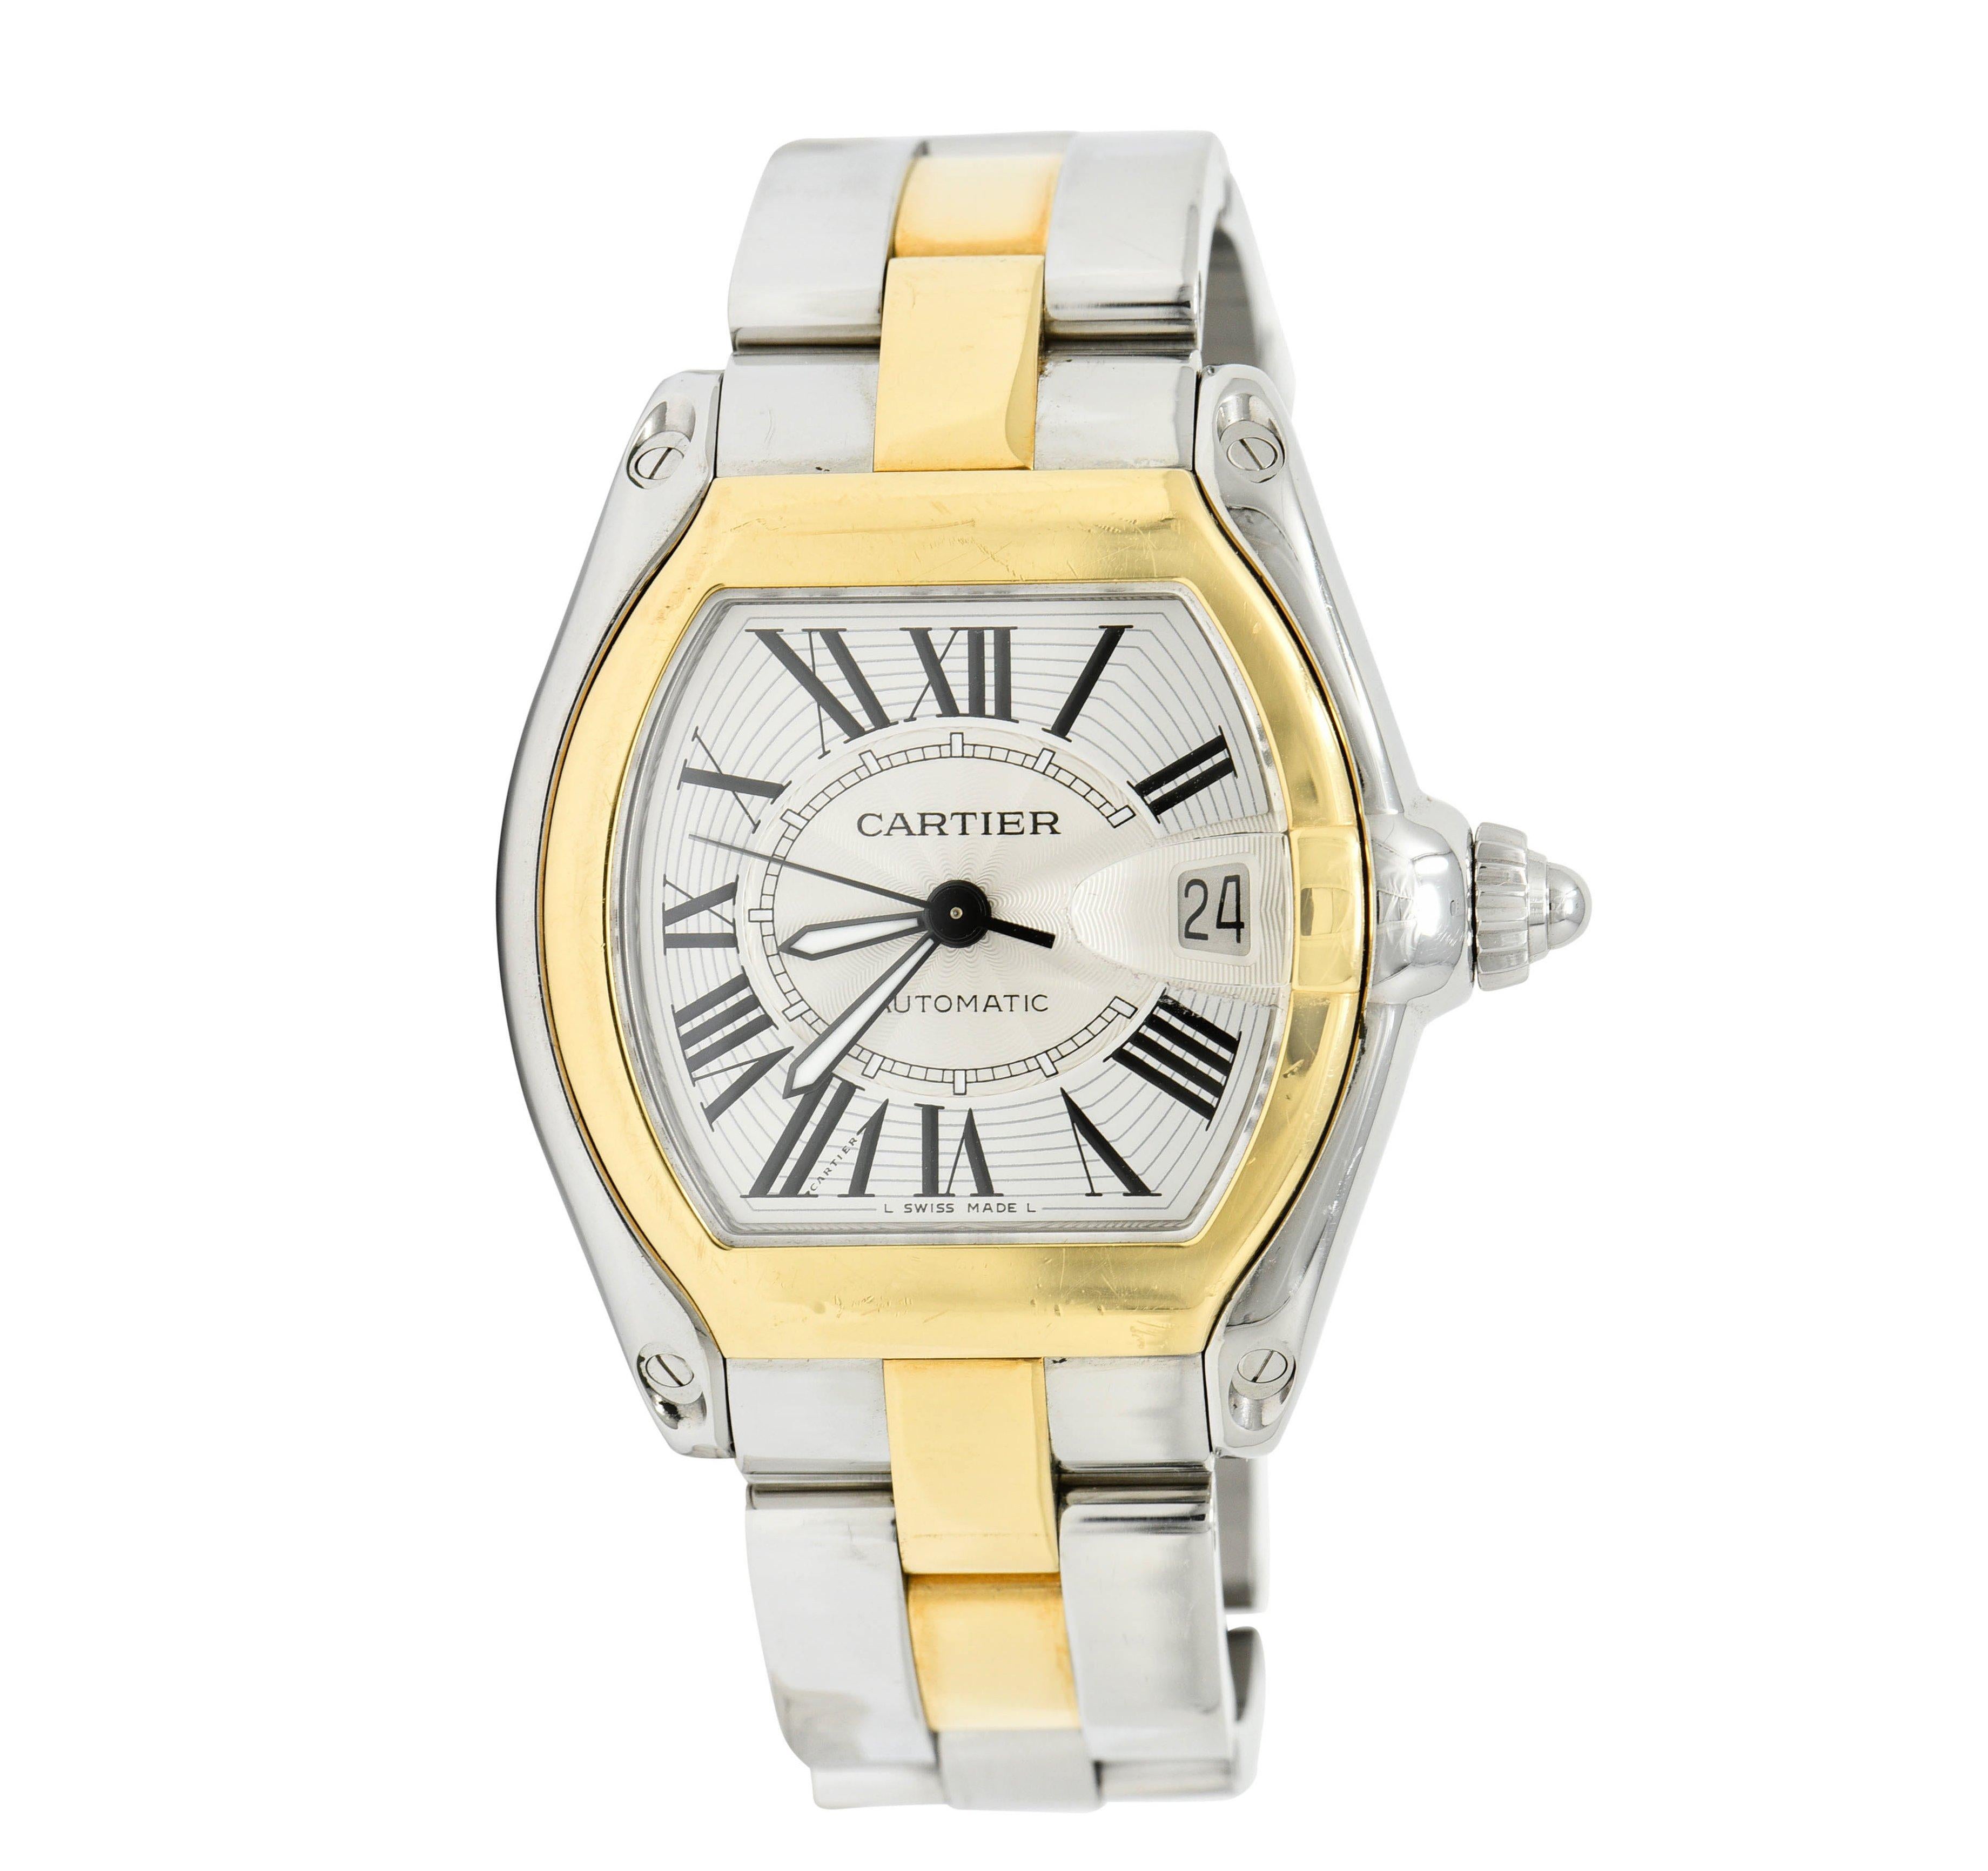 Contemporary Cartier Roadster Unisex Large Two-Tone 18K Gold Automatic Men's Watch